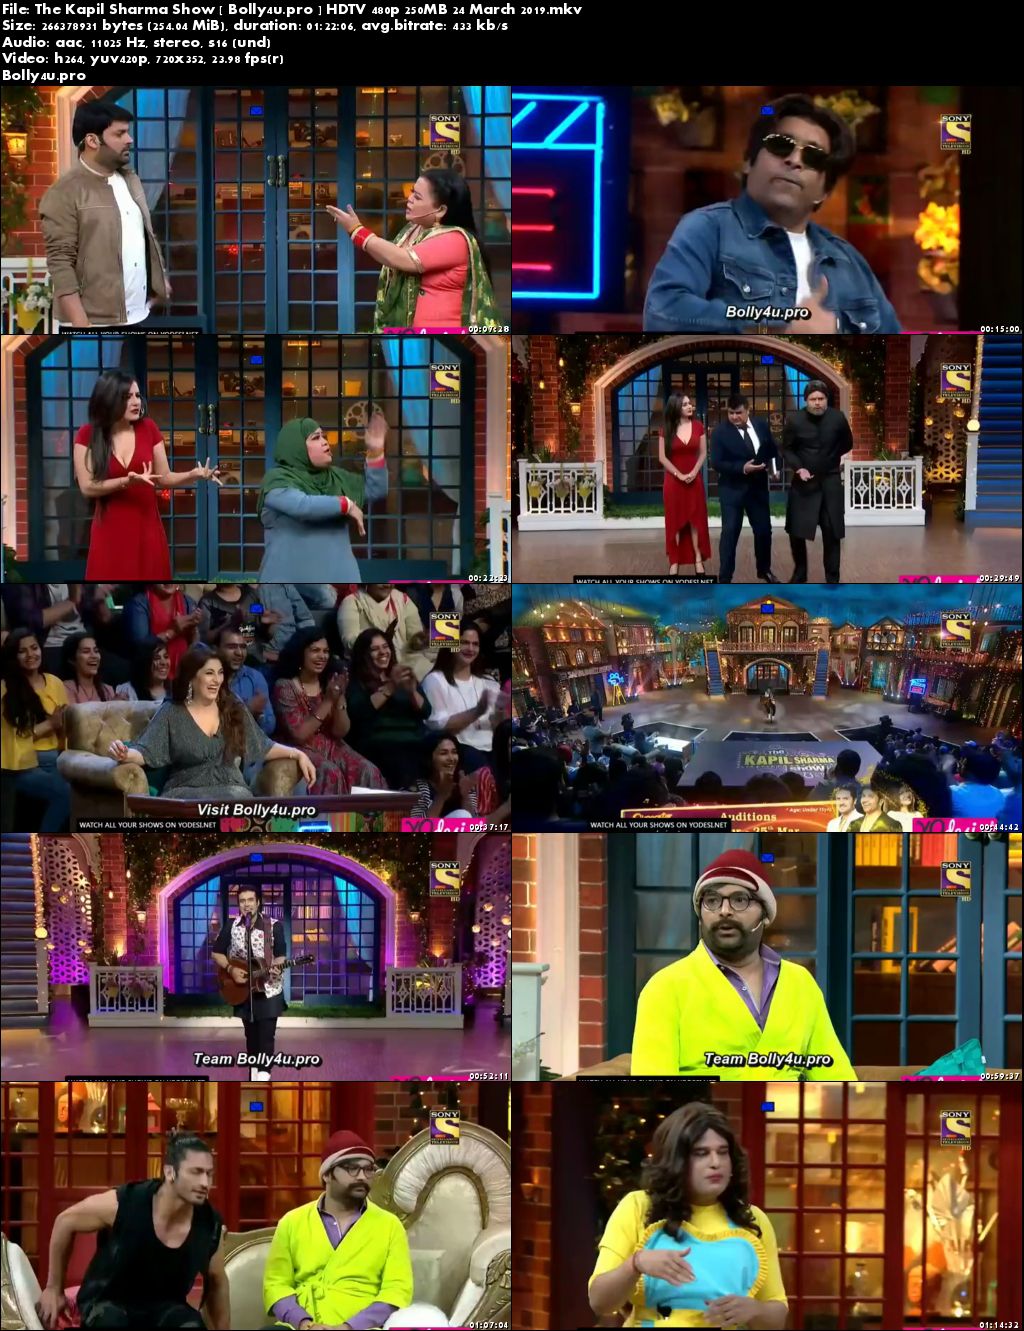 The Kapil Sharma Show HDTV 480p 250MB 24 March 2019 Download